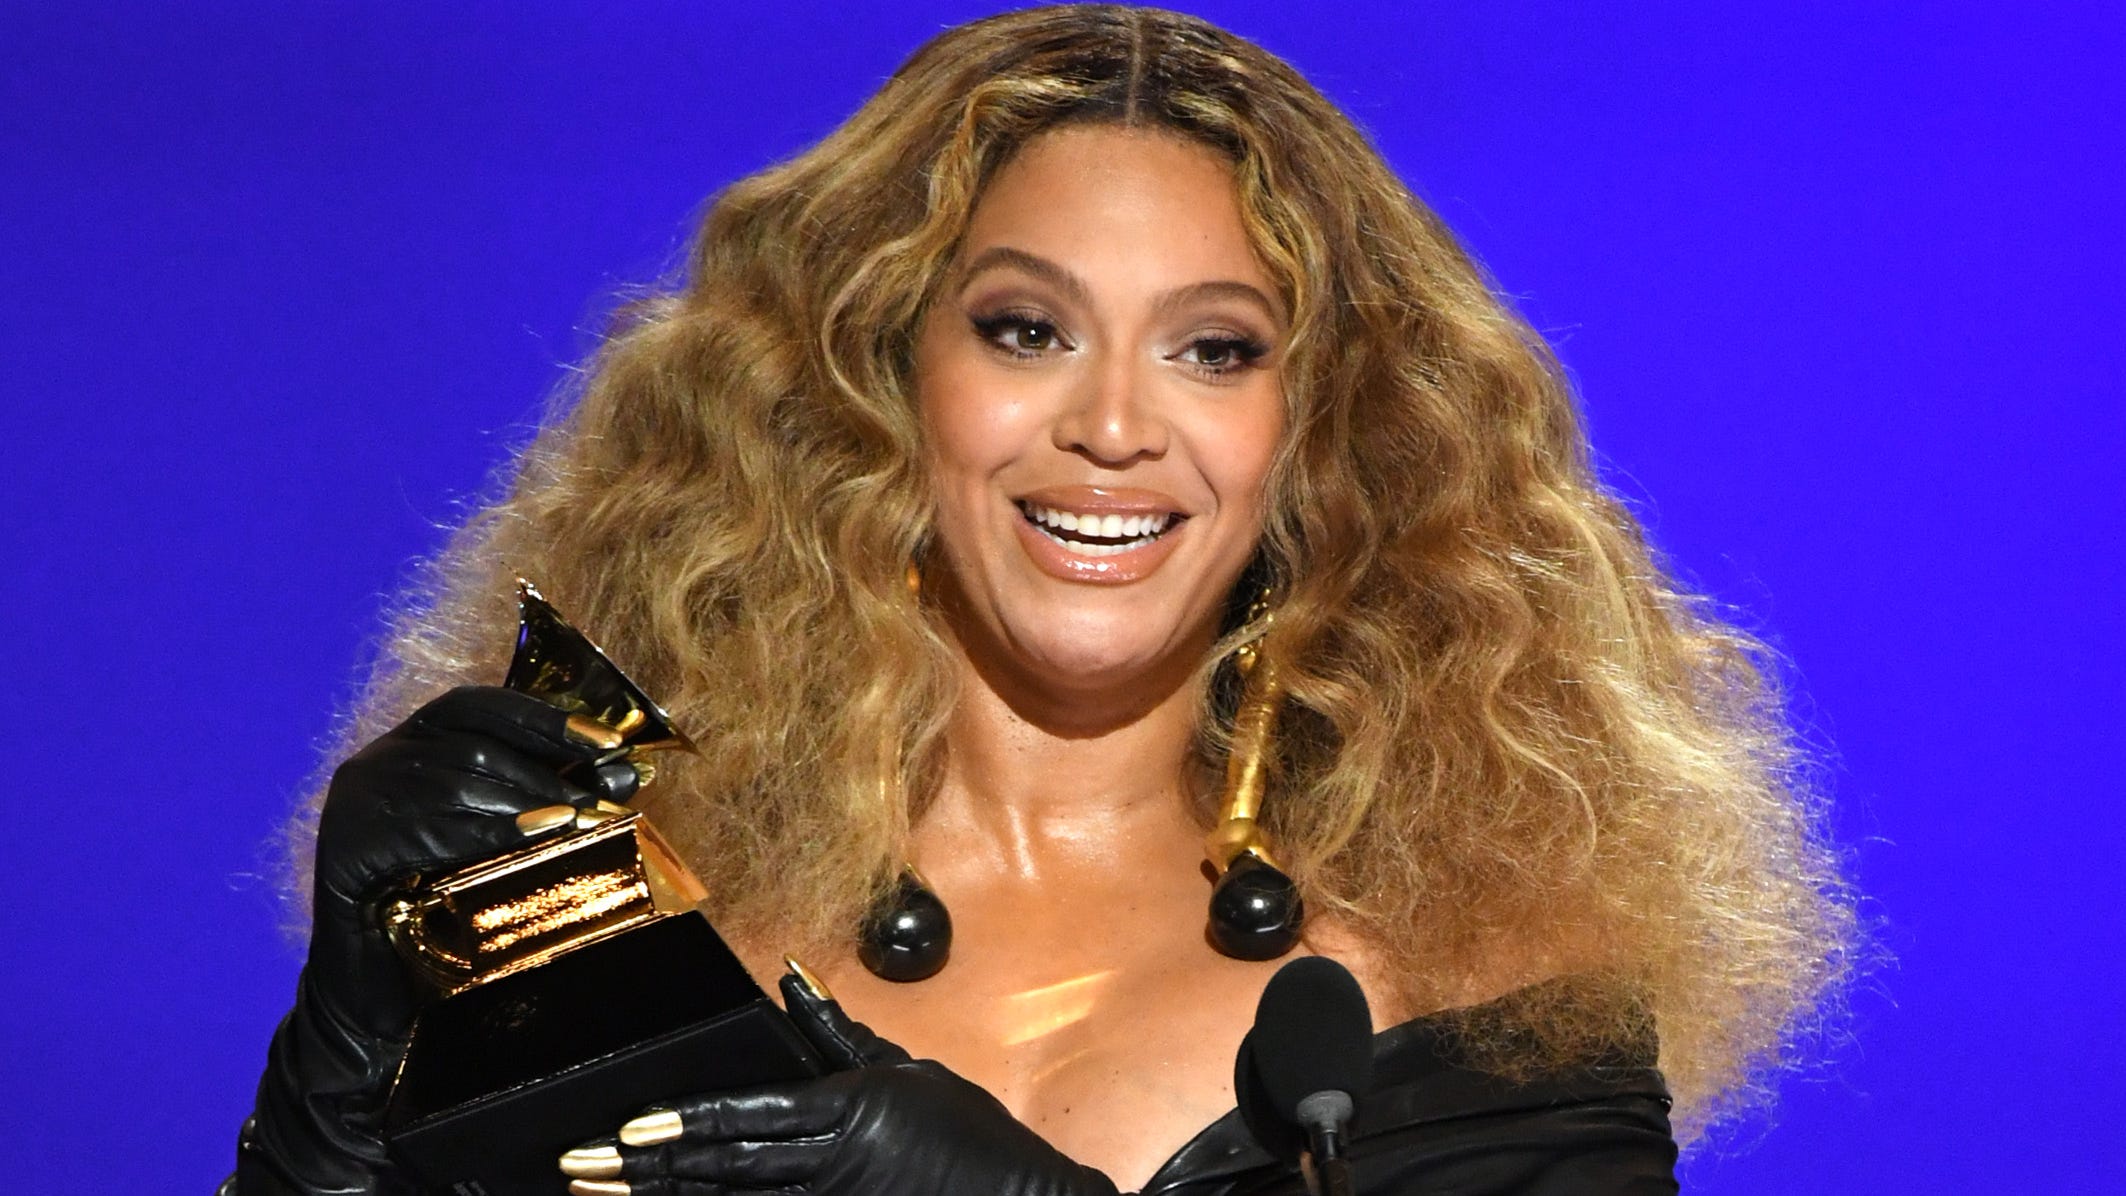 Beyoncé only female artist to land two albums on Apple Music's 100 best albums list